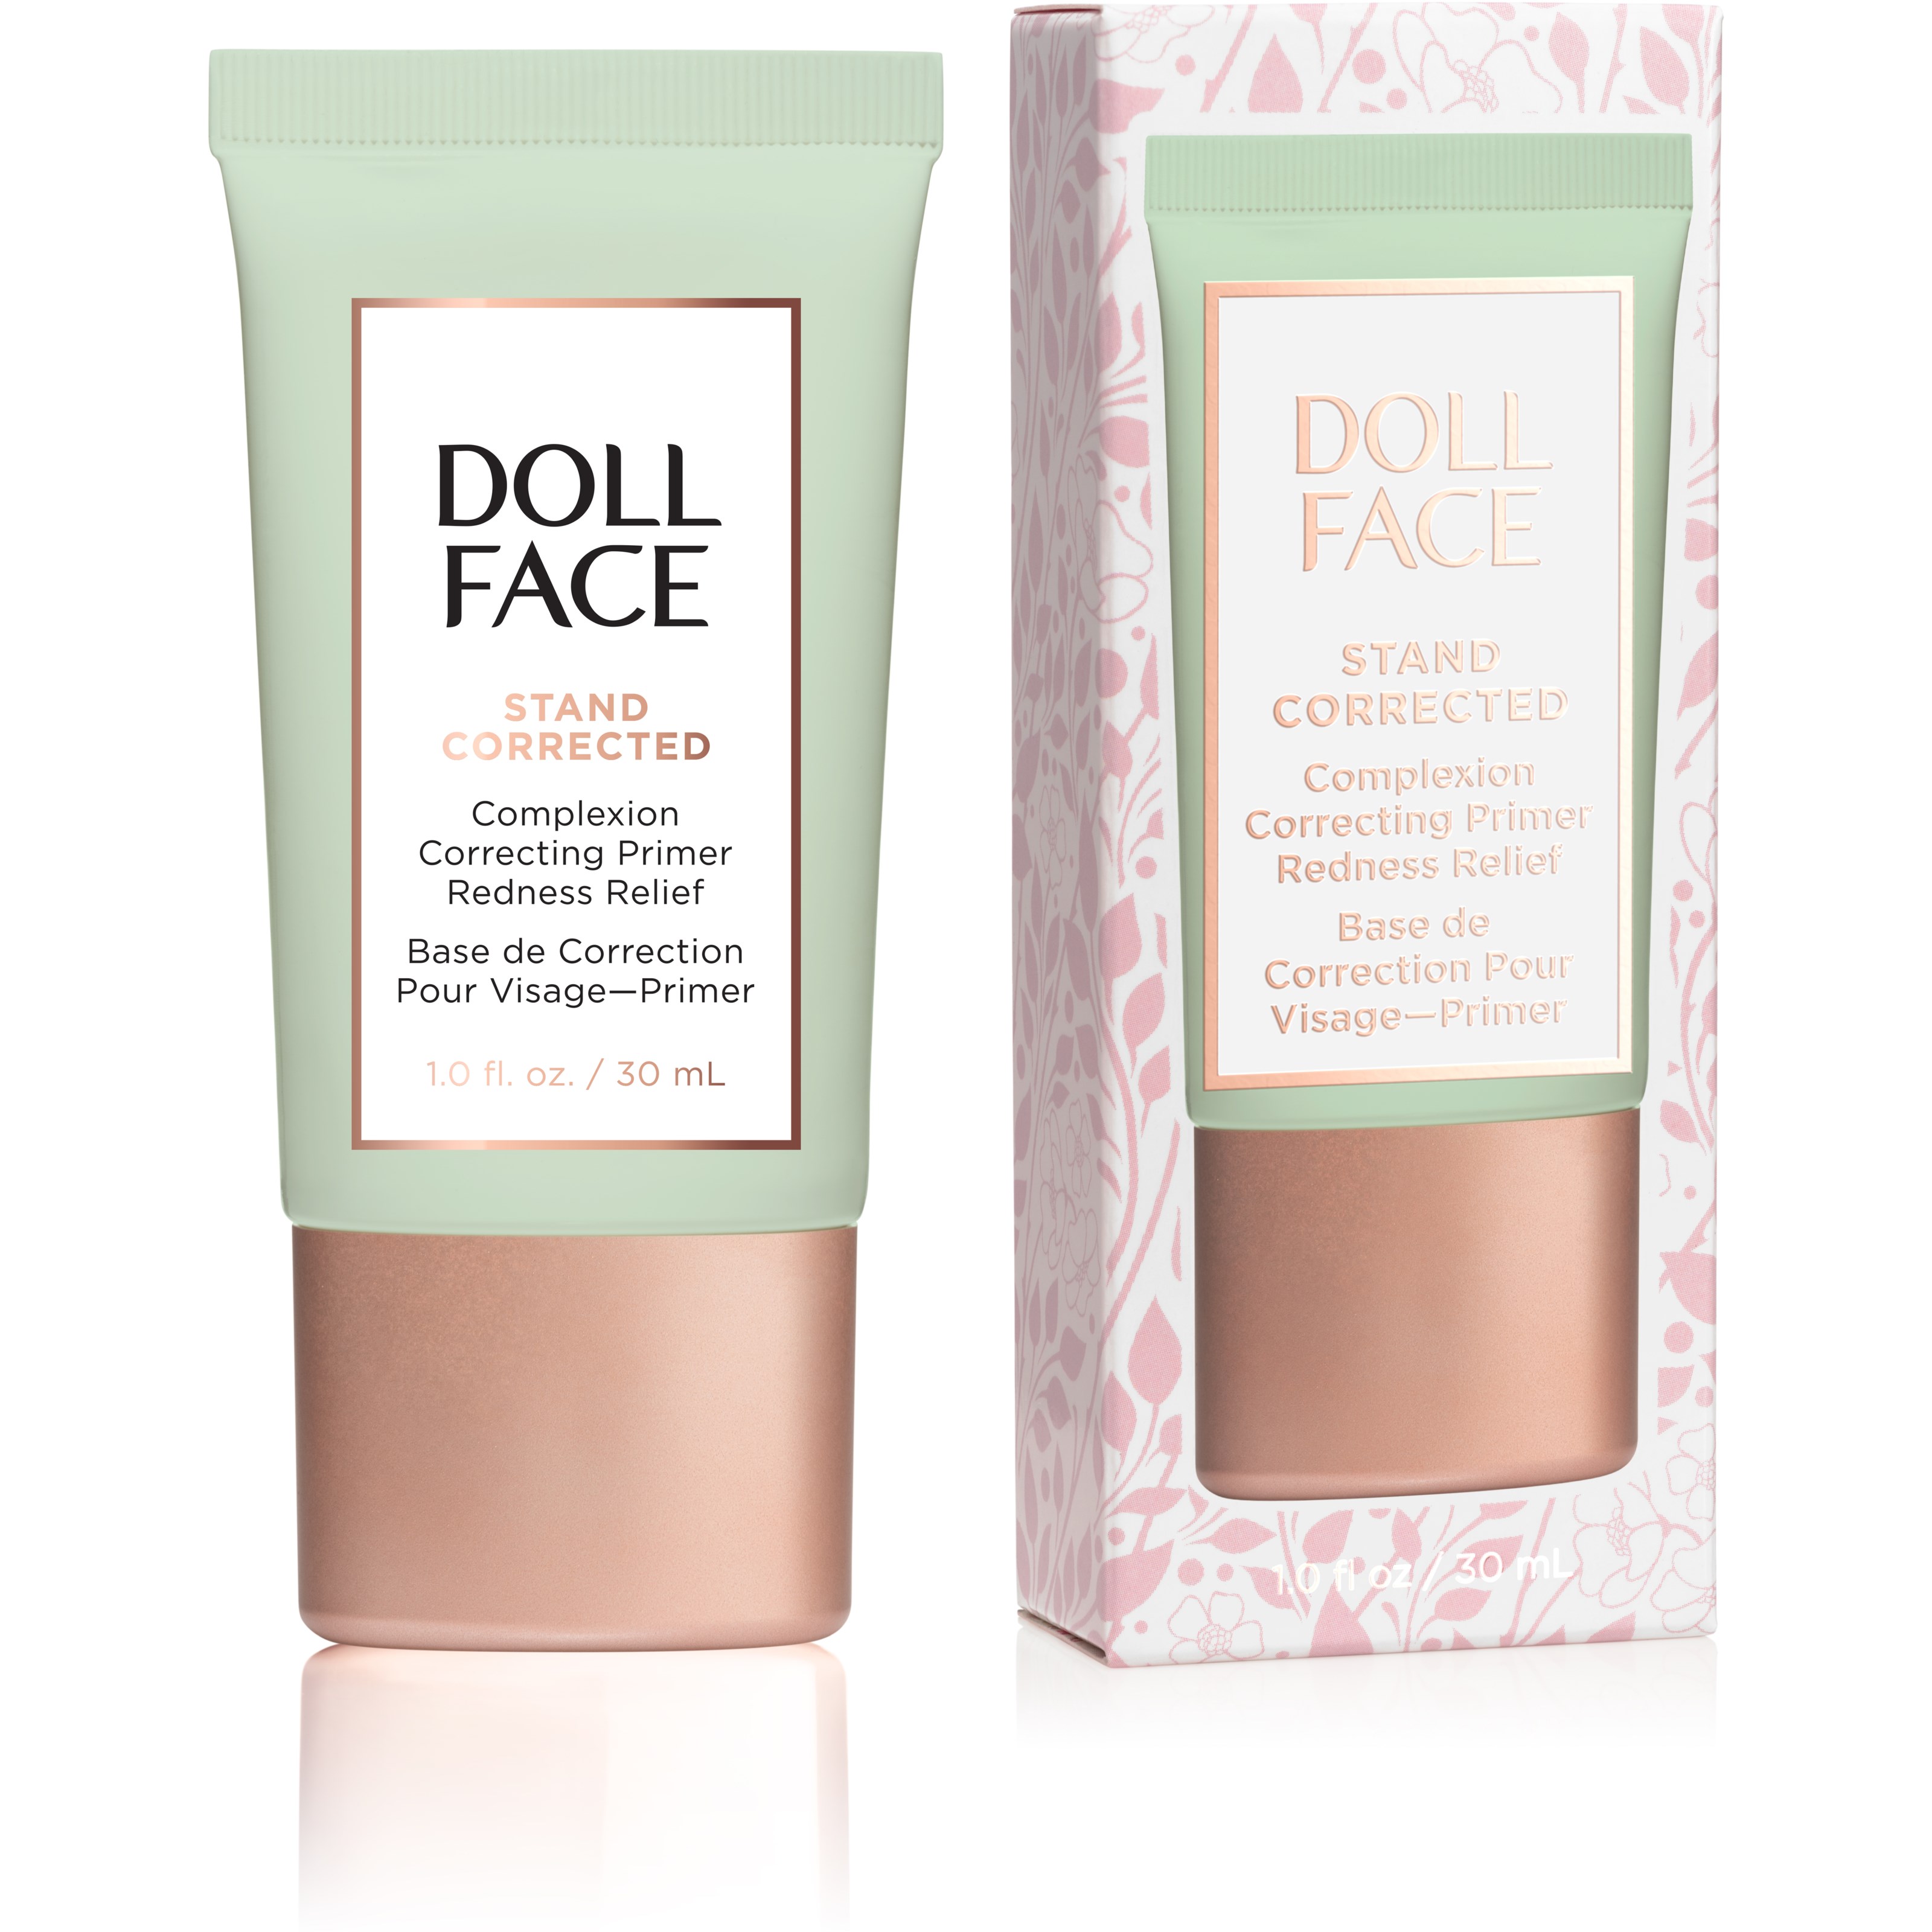 Läs mer om Doll Face Stand Corrected Complexion Equalizer